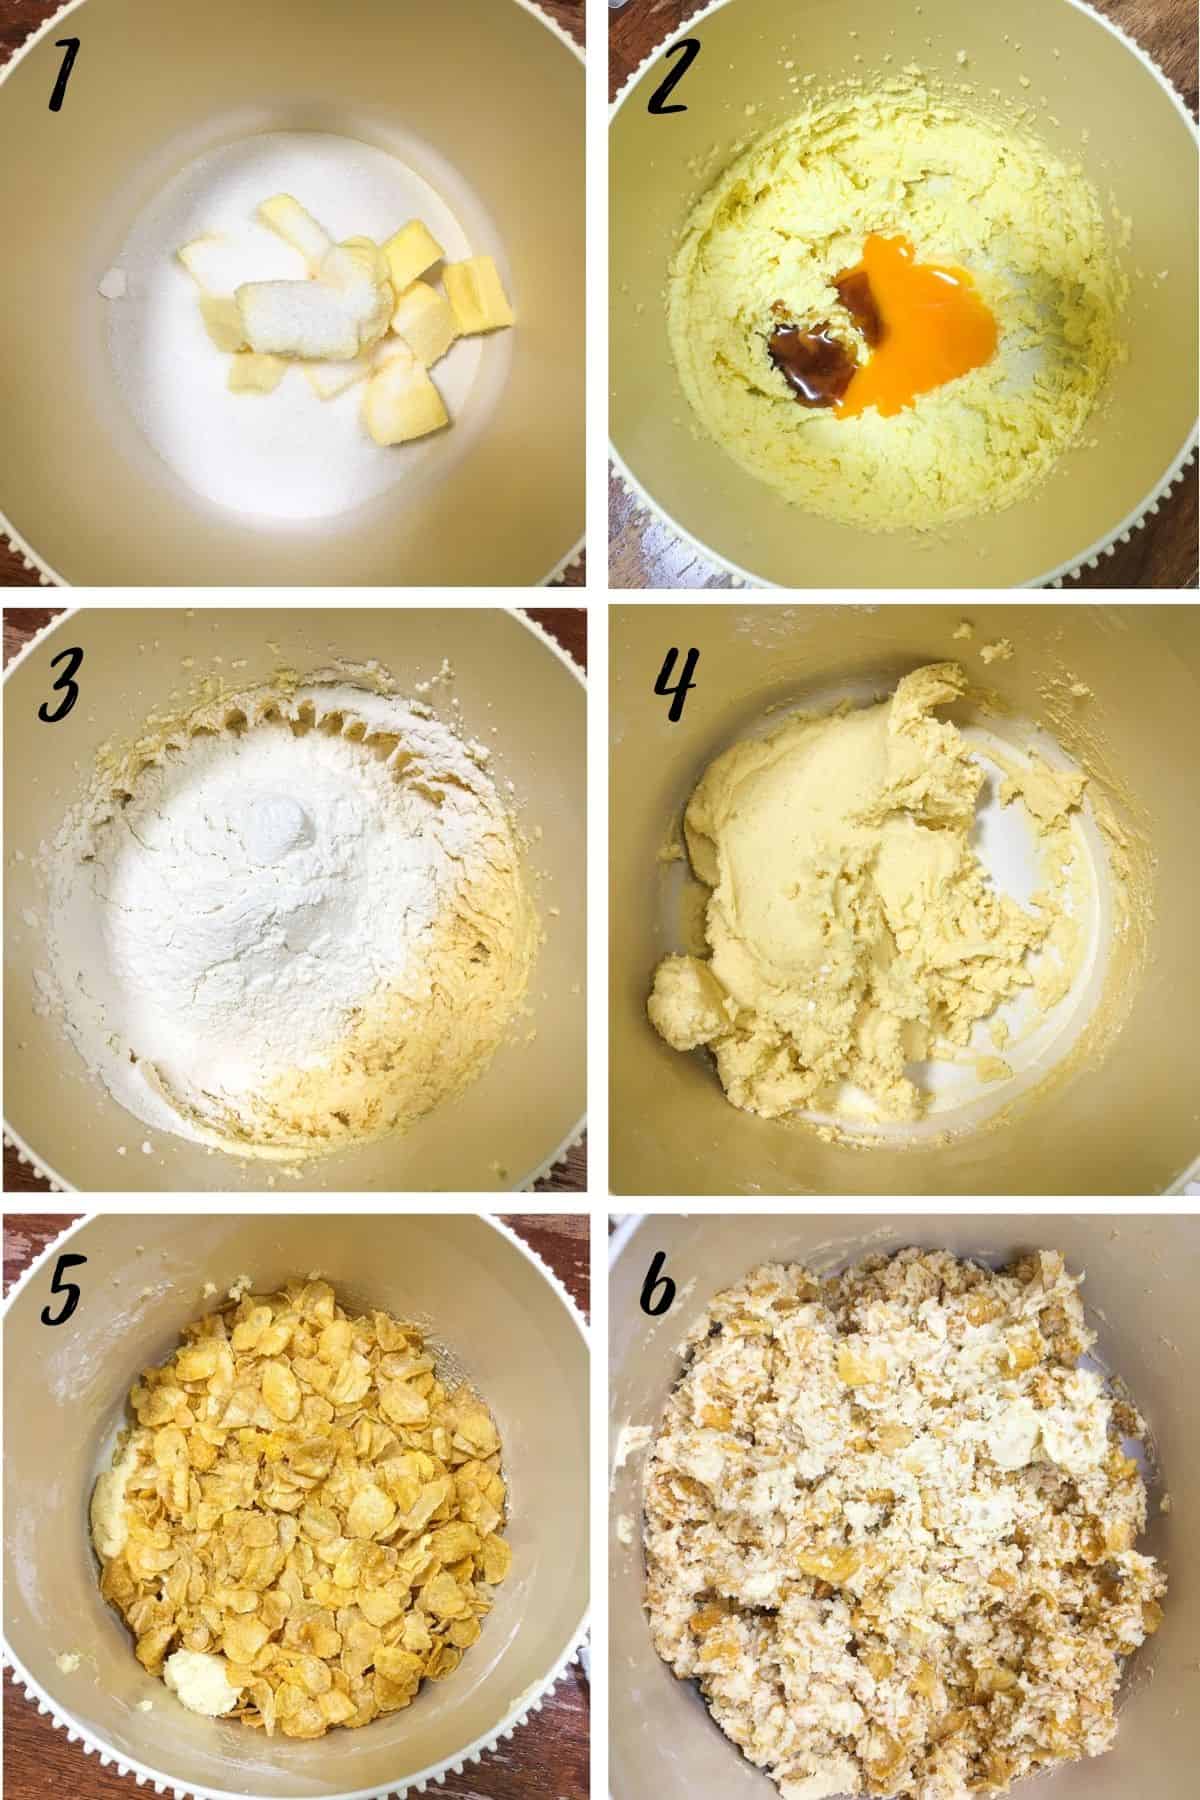 A poster of 6 images showing how to mix dough.